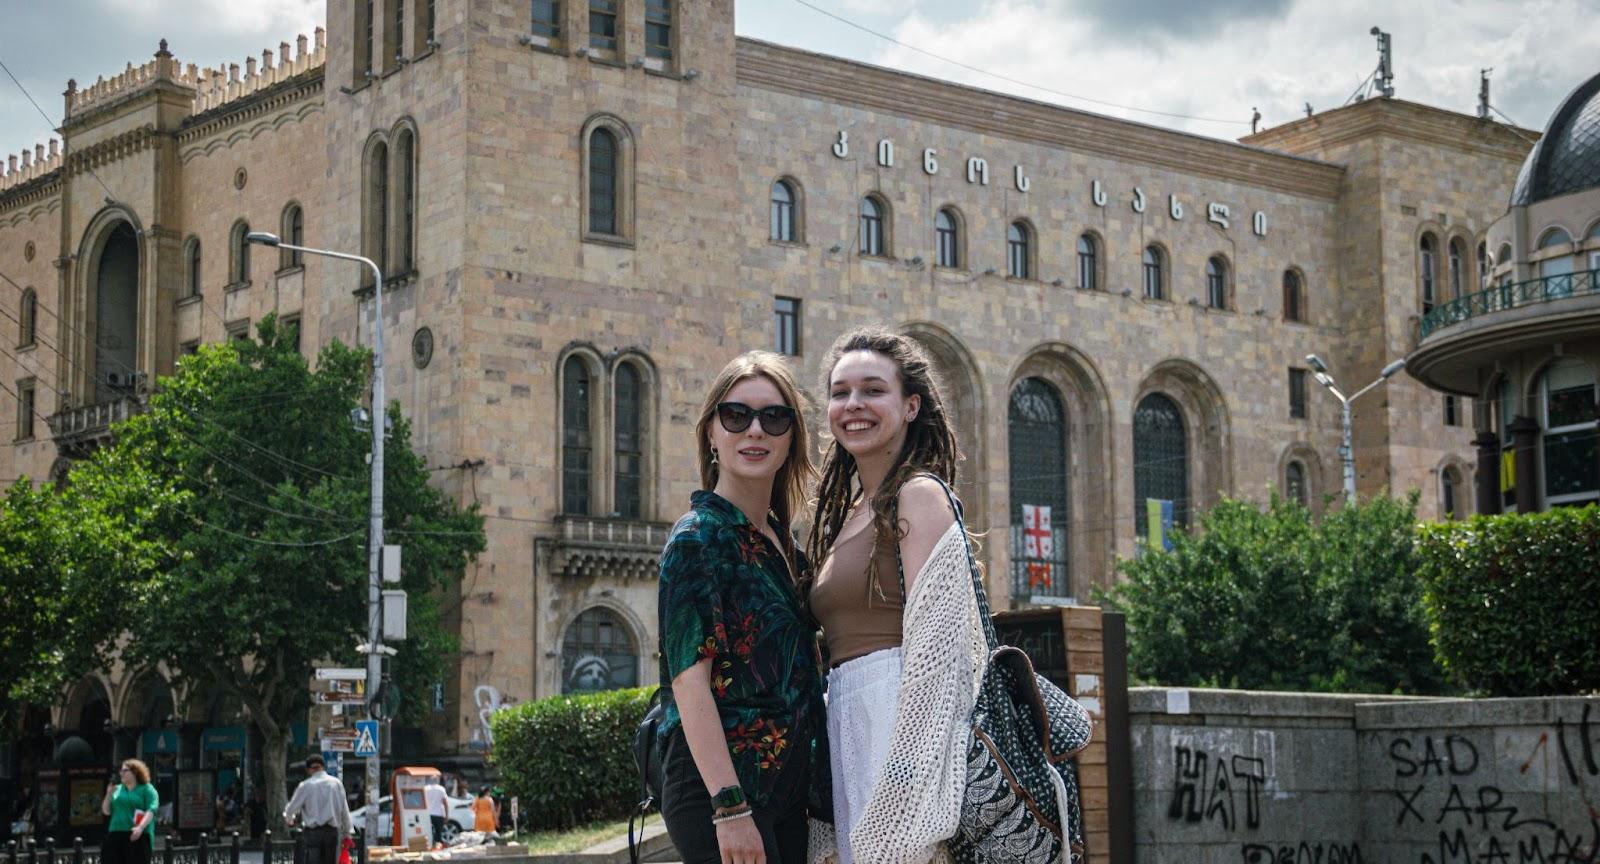 Two women posing for a photo in a street in Tbilisi